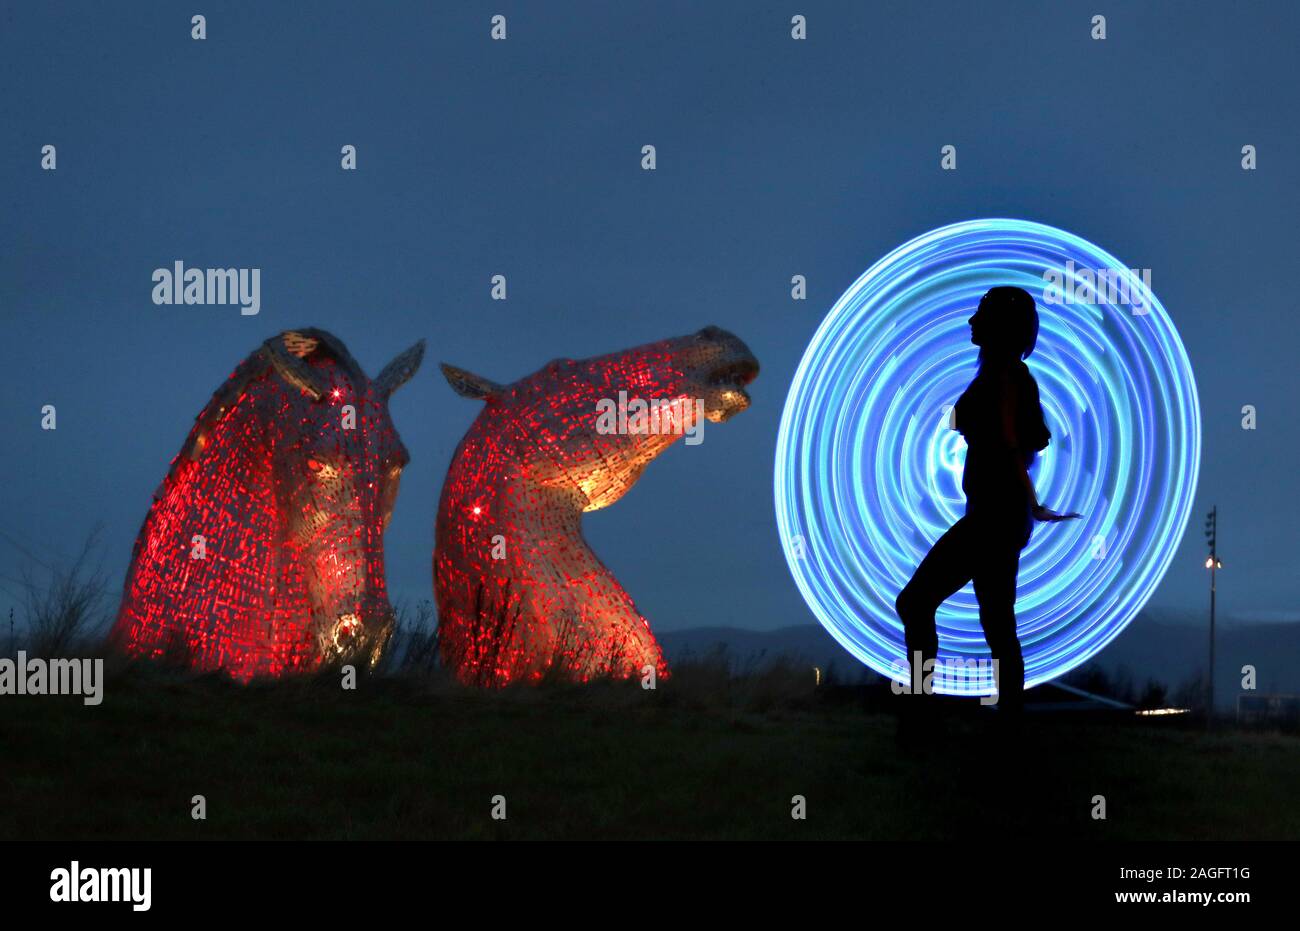 LED Hooper Daiquiri Dusk performs at a preview for Fire & Light: 2020 Visions held at The Helix, home of The Kelpies on January 1st & 2nd. Fire & Light: 2020 Visions encourages visitors to embrace the adventure of a New Year with a walk through The Helix park towards the magical Kelpies, interacting with an amazing array of performances and installations along the way. Stock Photo